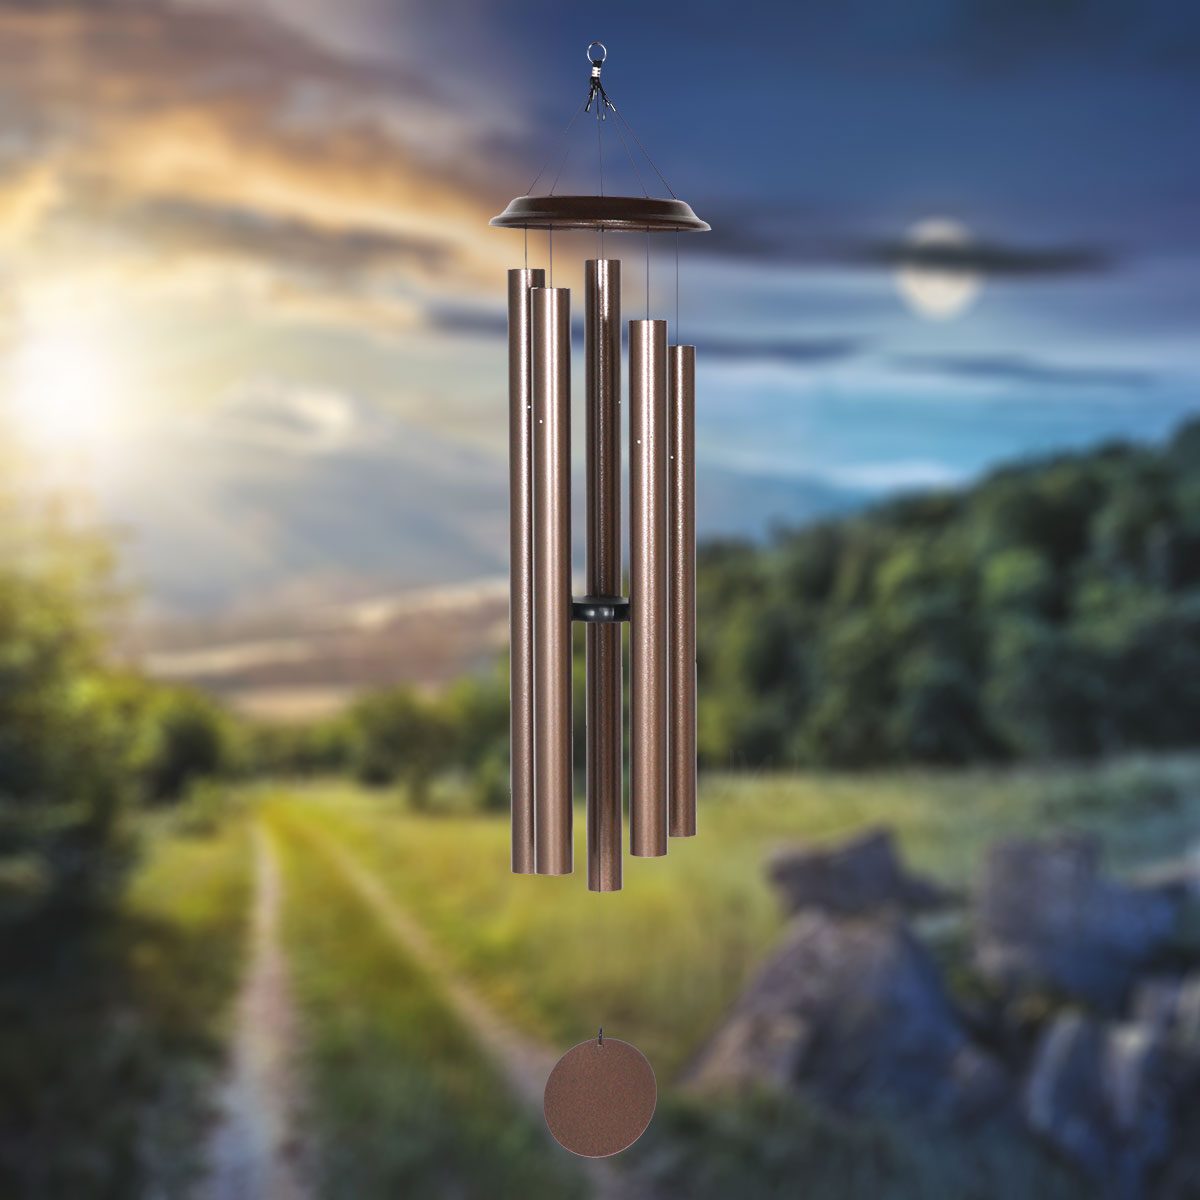 Shenandoah Melodies 60 Inch Copper Vein Wind Chime - Scale Of A